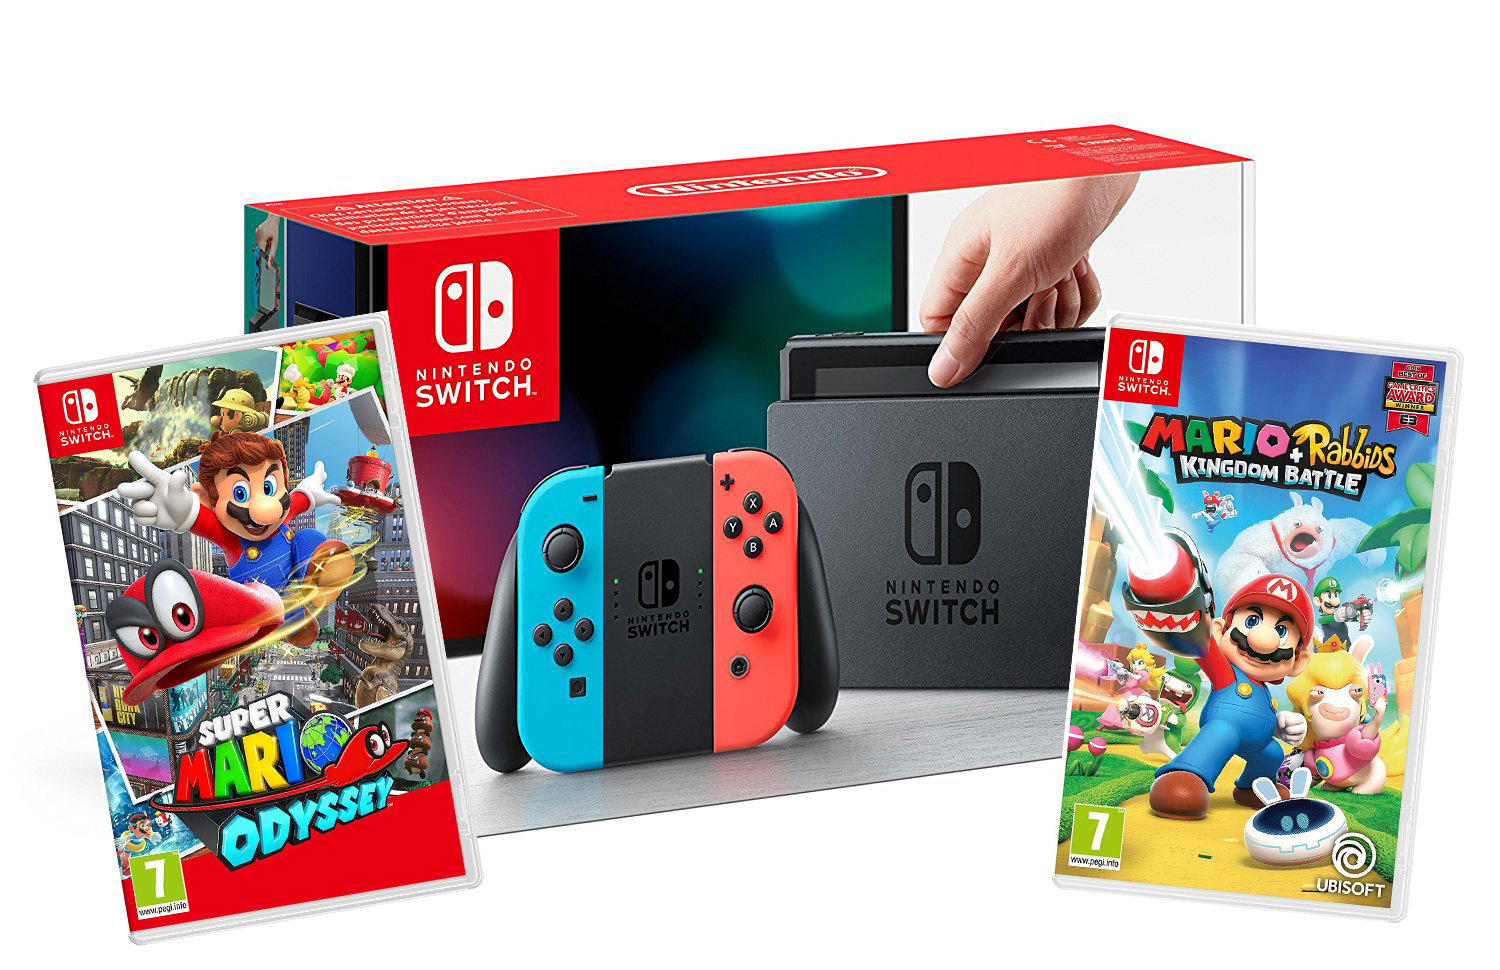 Deals Grab A Cyber Monday Bargain With This Nintendo Switch Bundle From Amazon Uk Nintendo Life